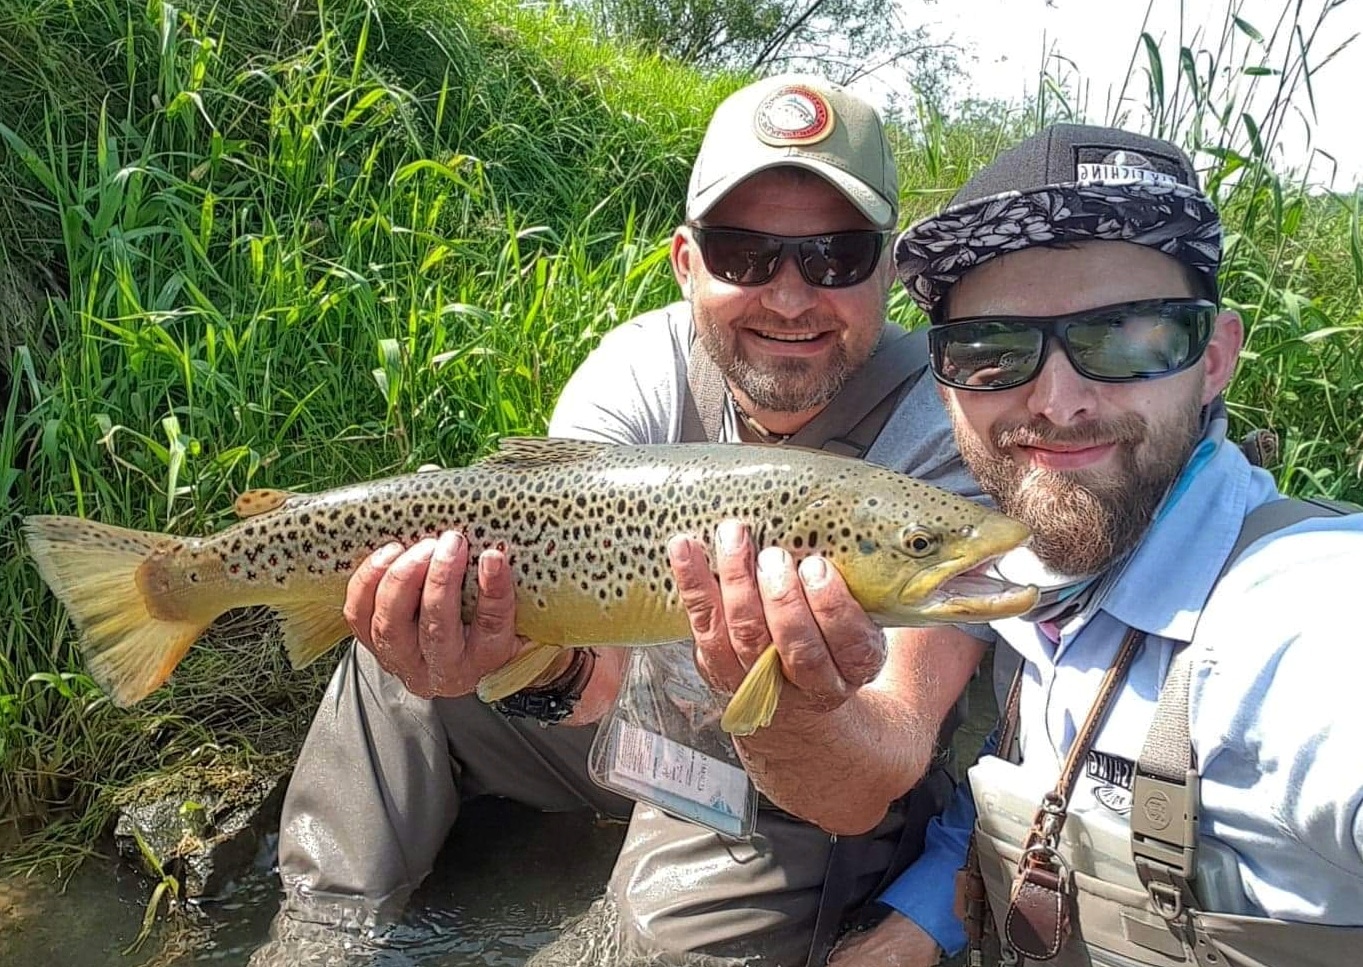 The best guide in Poland = happy angler = fly fishing in poland